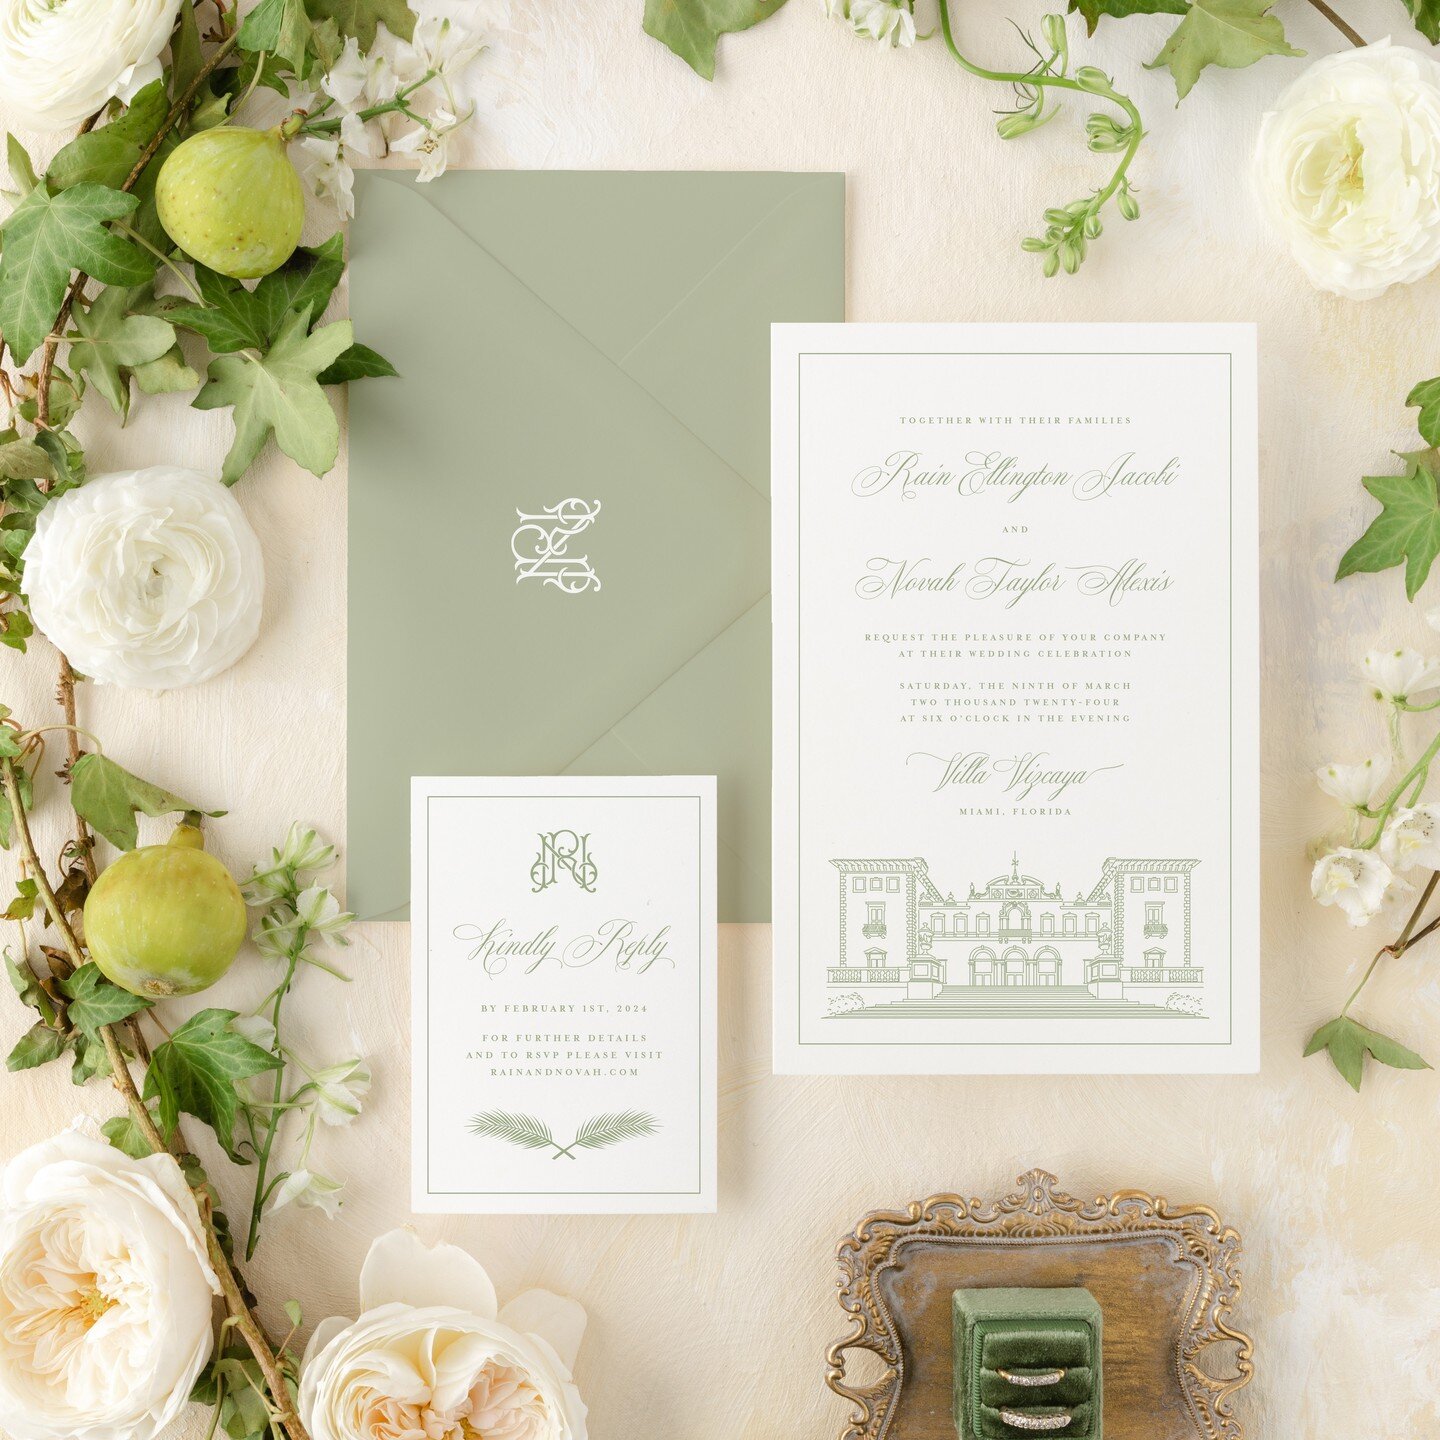 Vizcaya Museum and Gardens is one of the most beautiful historic estates and coveted wedding venue in South Florida. Here is a clean, elegant wedding invitation suite featuring the east-facing facade of Vizcaya. Opt for a reply card that points guest